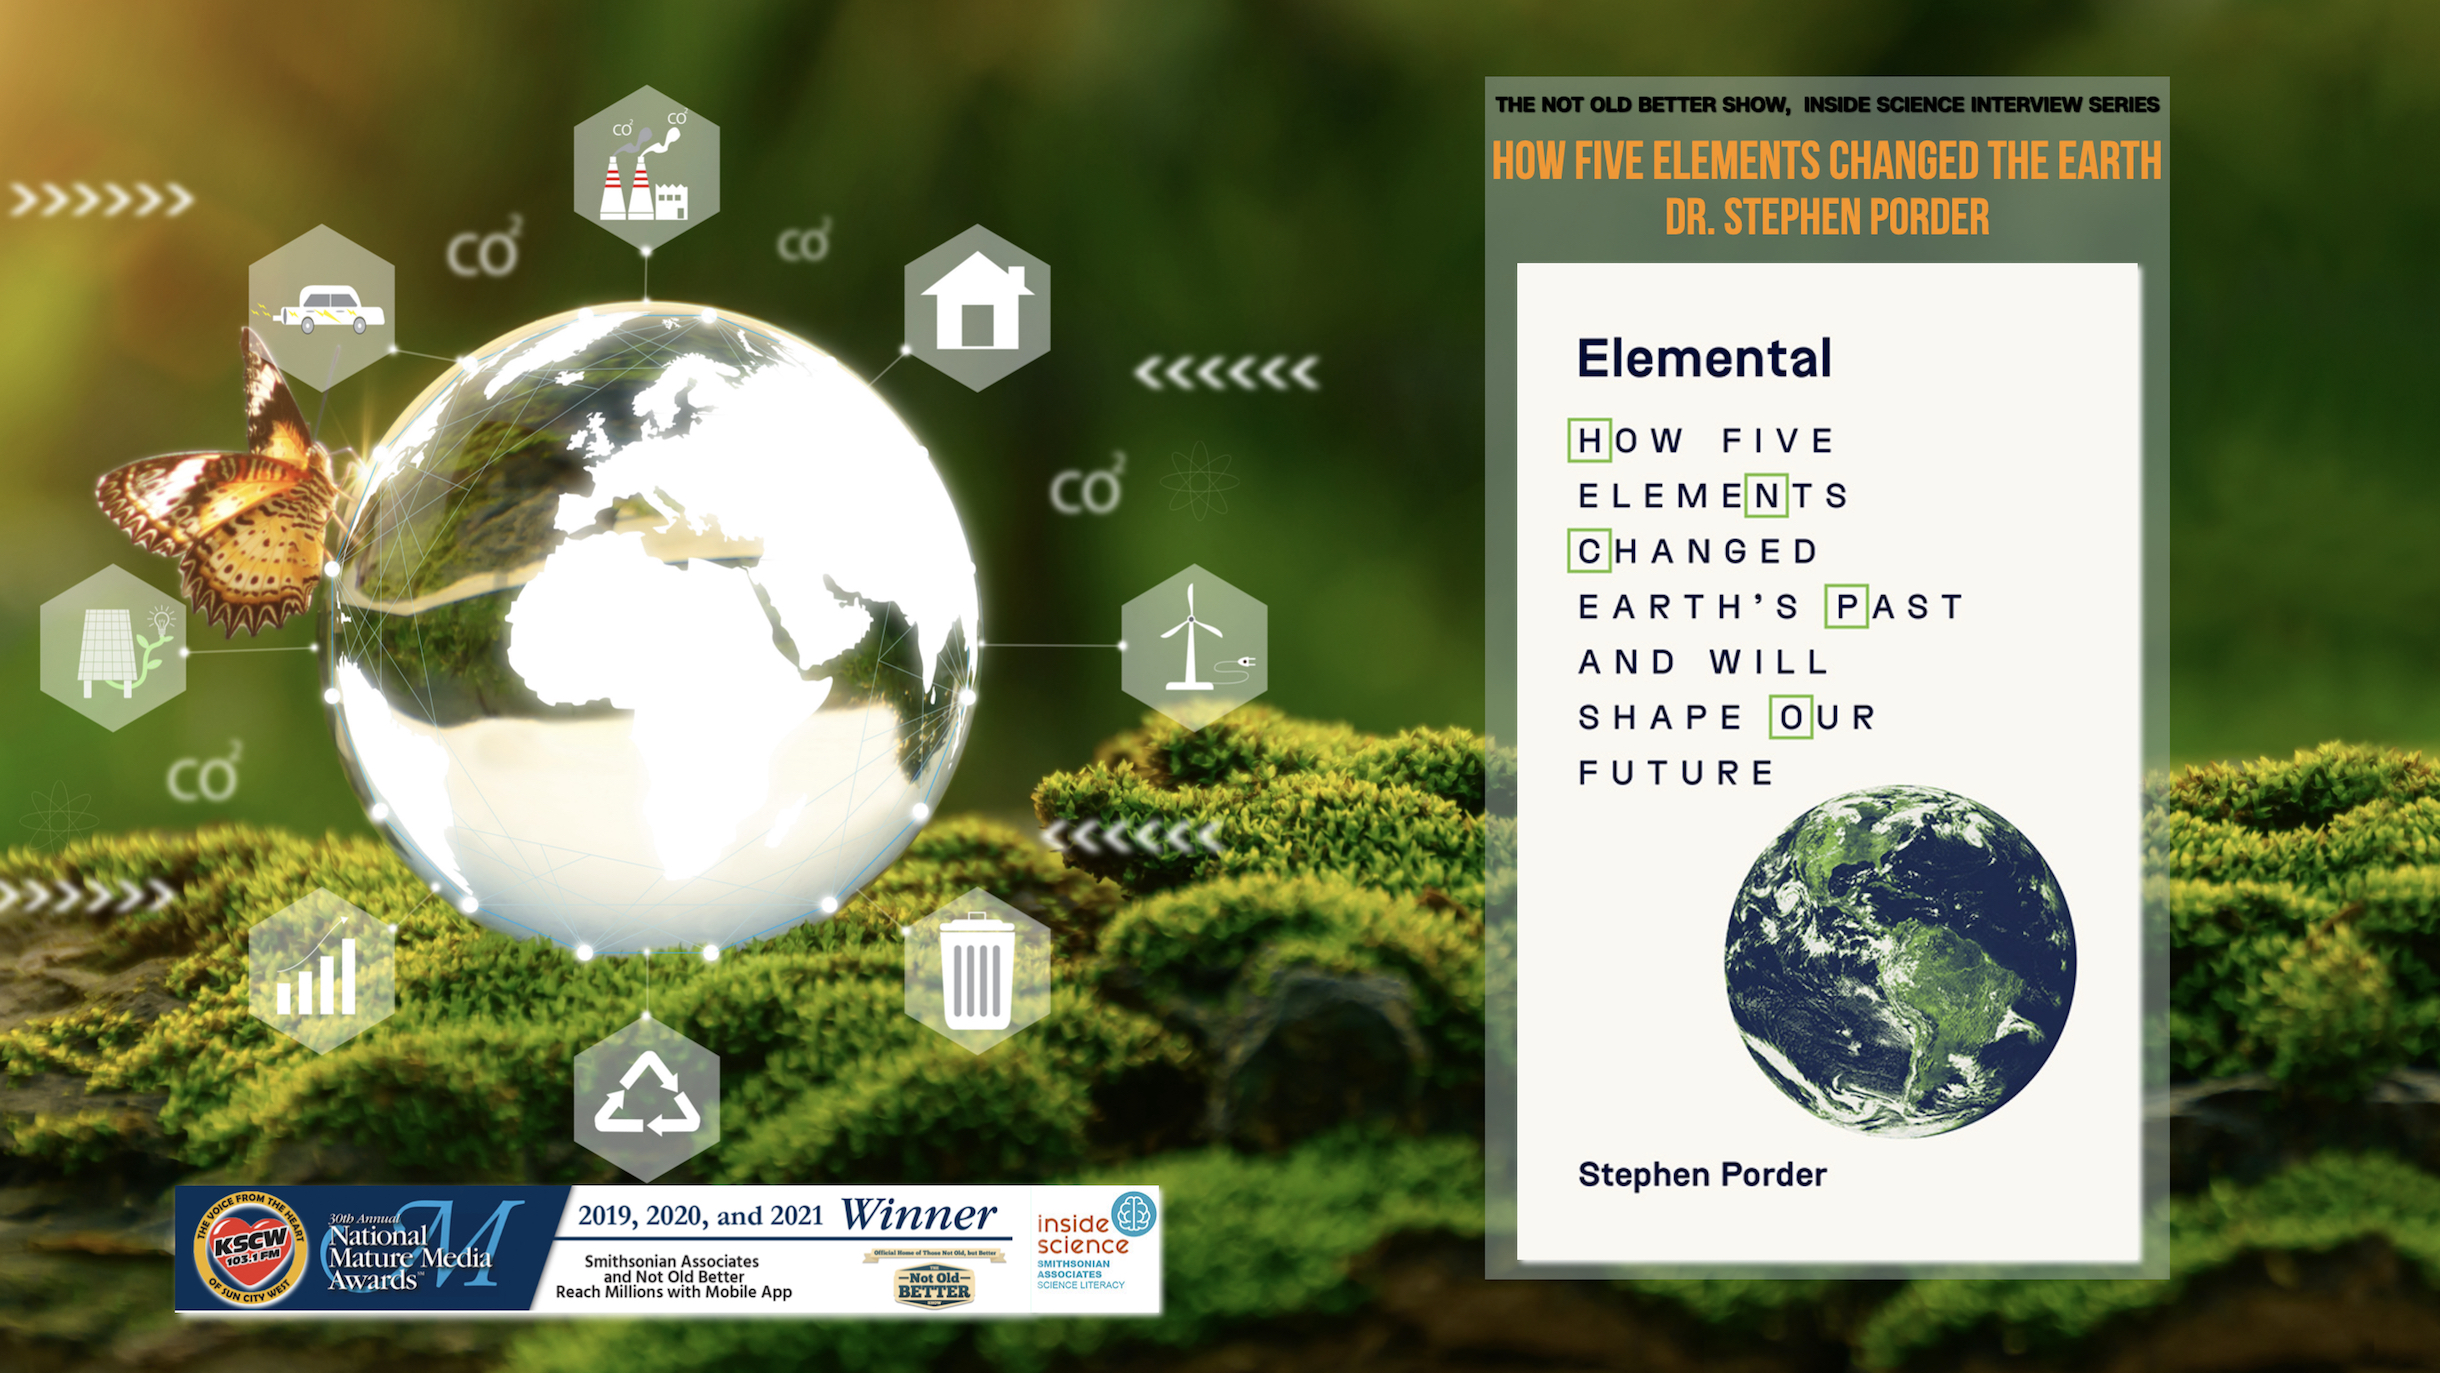 Elemental Forces: The Five Building Blocks That Shaped Our World